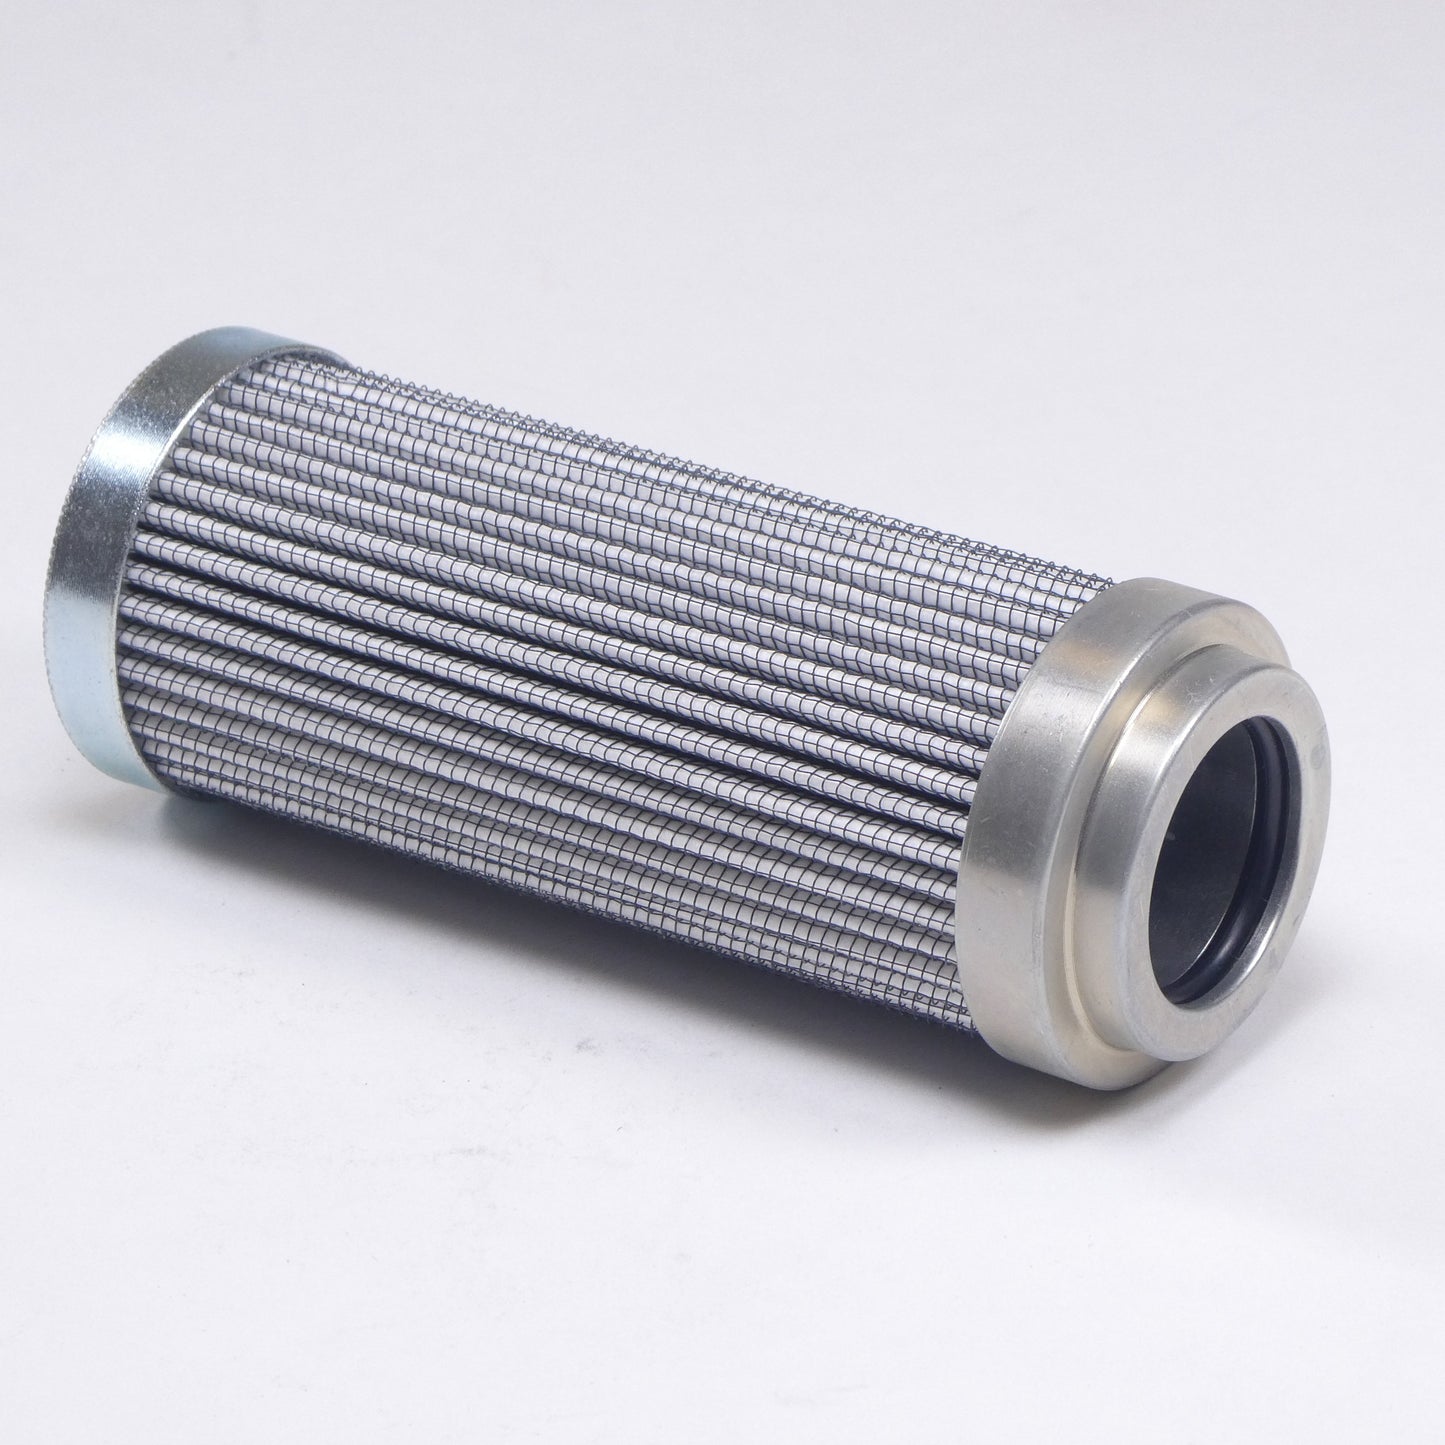 Hydrafil Replacement Filter Element for Separation Technologies 3902SGHV04